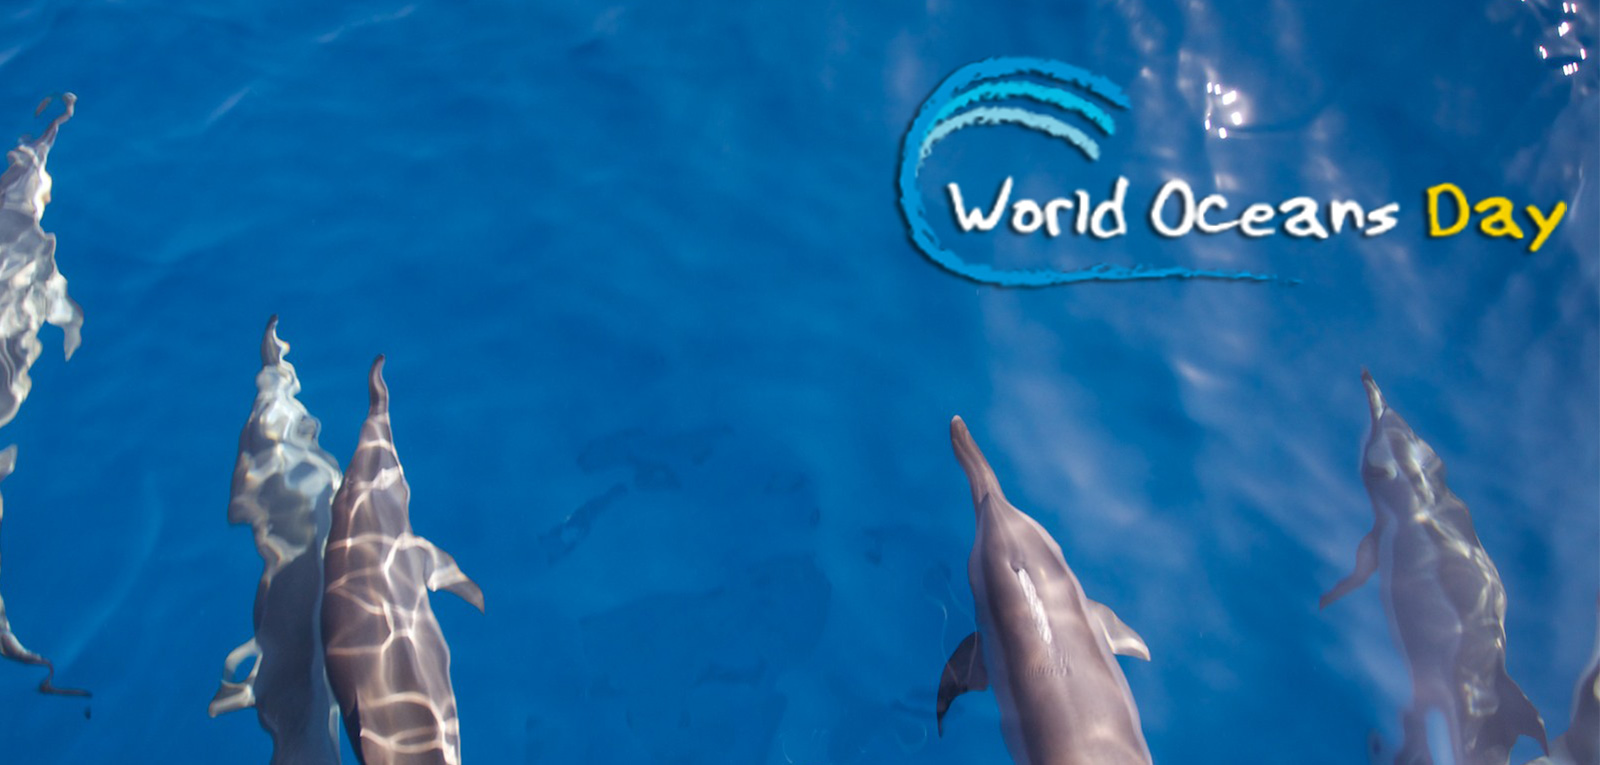 Best World Ocean Day Wish Pictures And Image